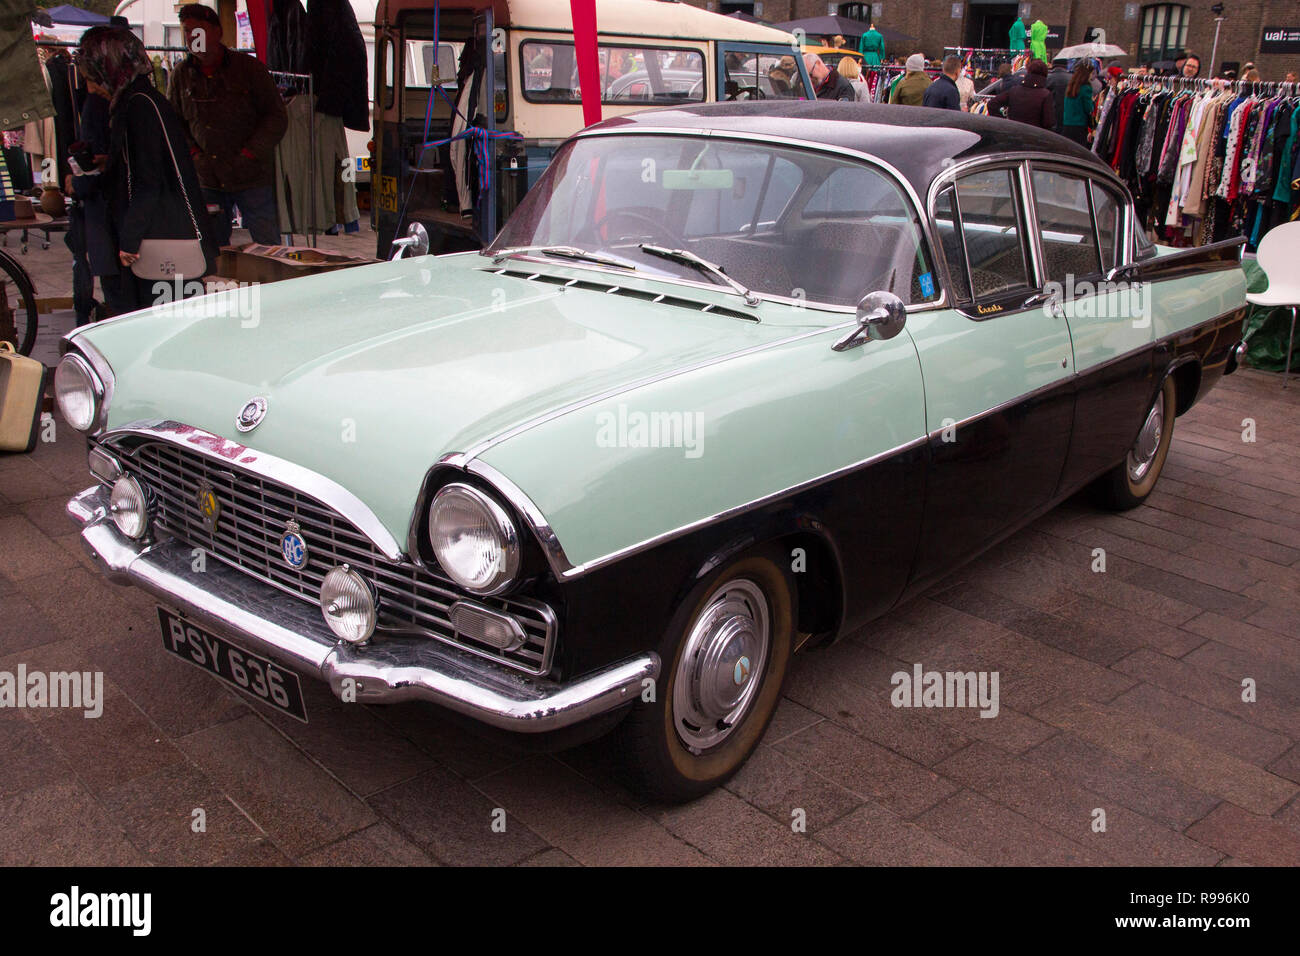 LONDON, ENGLAND - April 28, 2018. 1962 Vauxhall Cresta Hydramatic at the annual Classic Car Exhibition and Vintage Clothing Market at Kings Cross, Lon Stock Photo